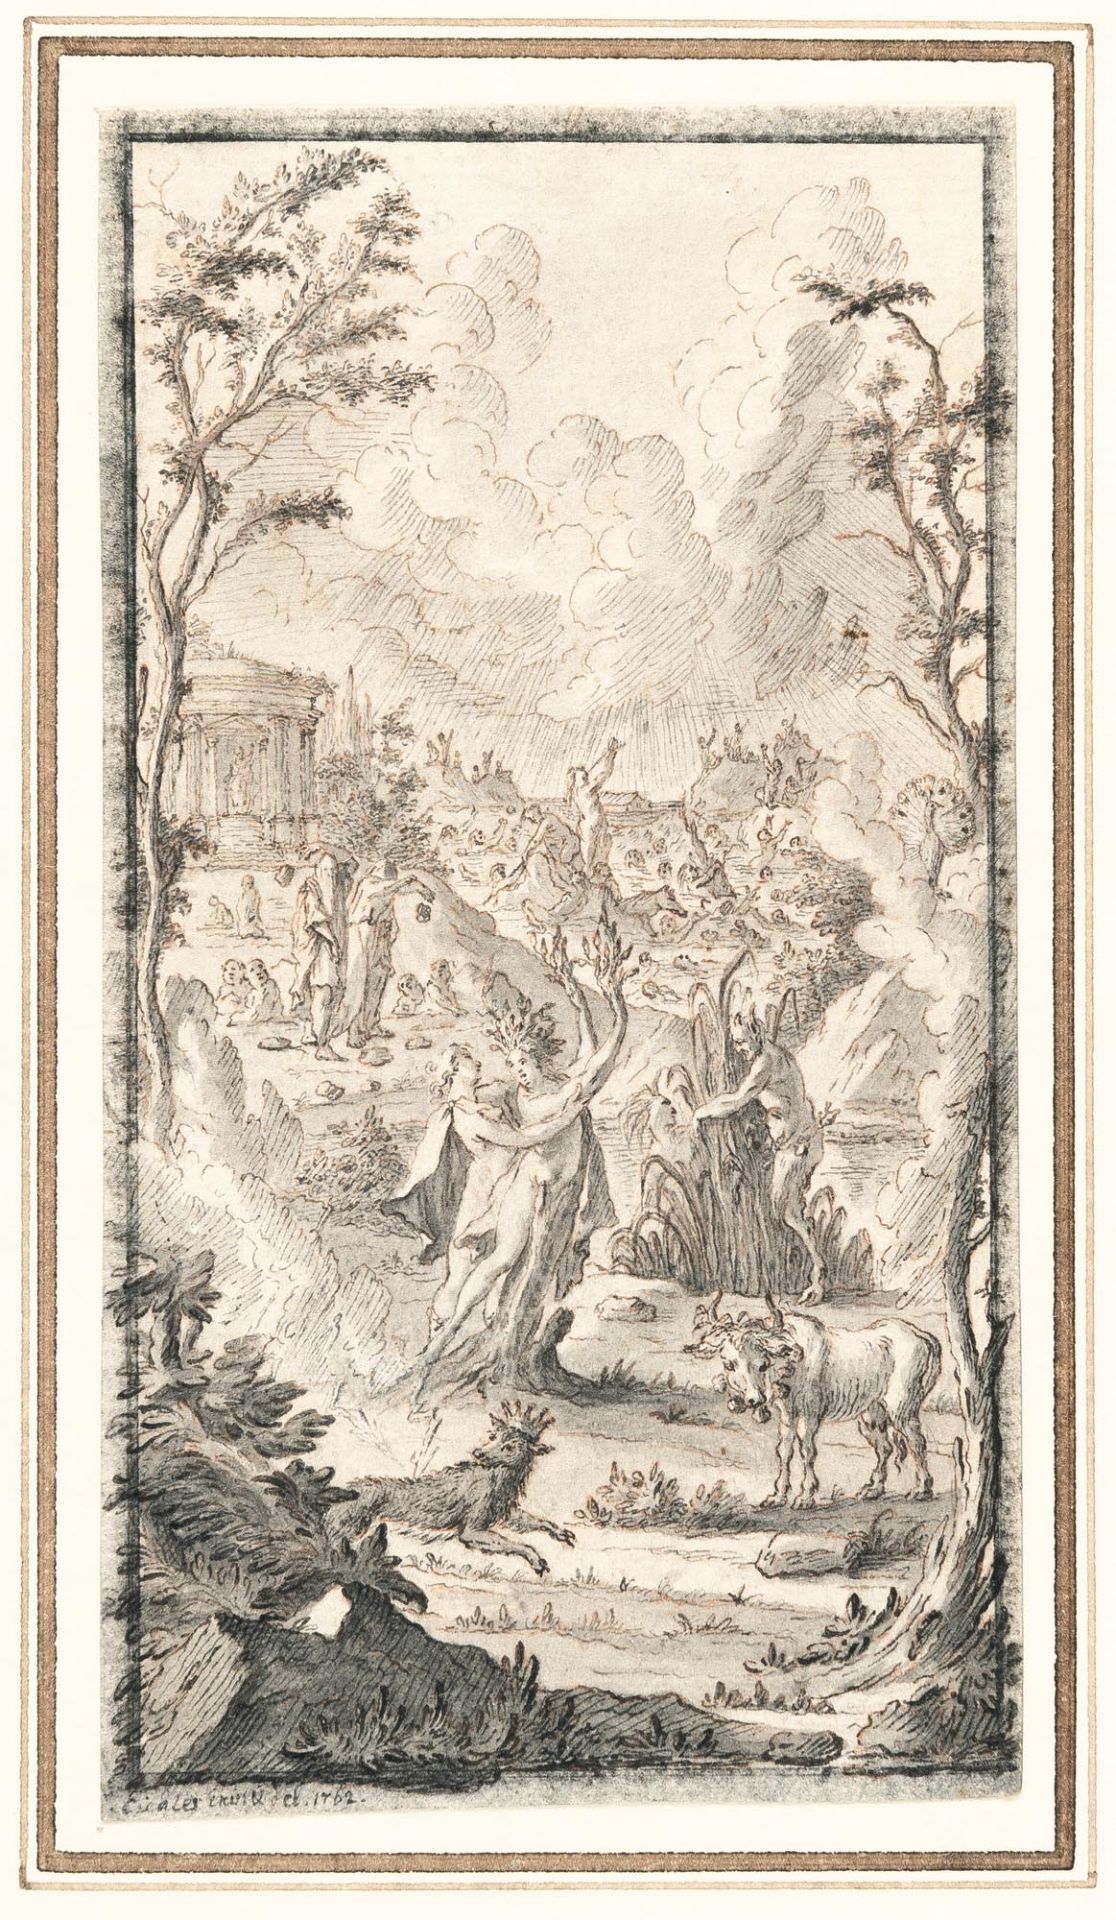 Gottfried Eichler D. J. (1715 - Augsburg - 1770) – Landscape with Apollo and Daphne and other